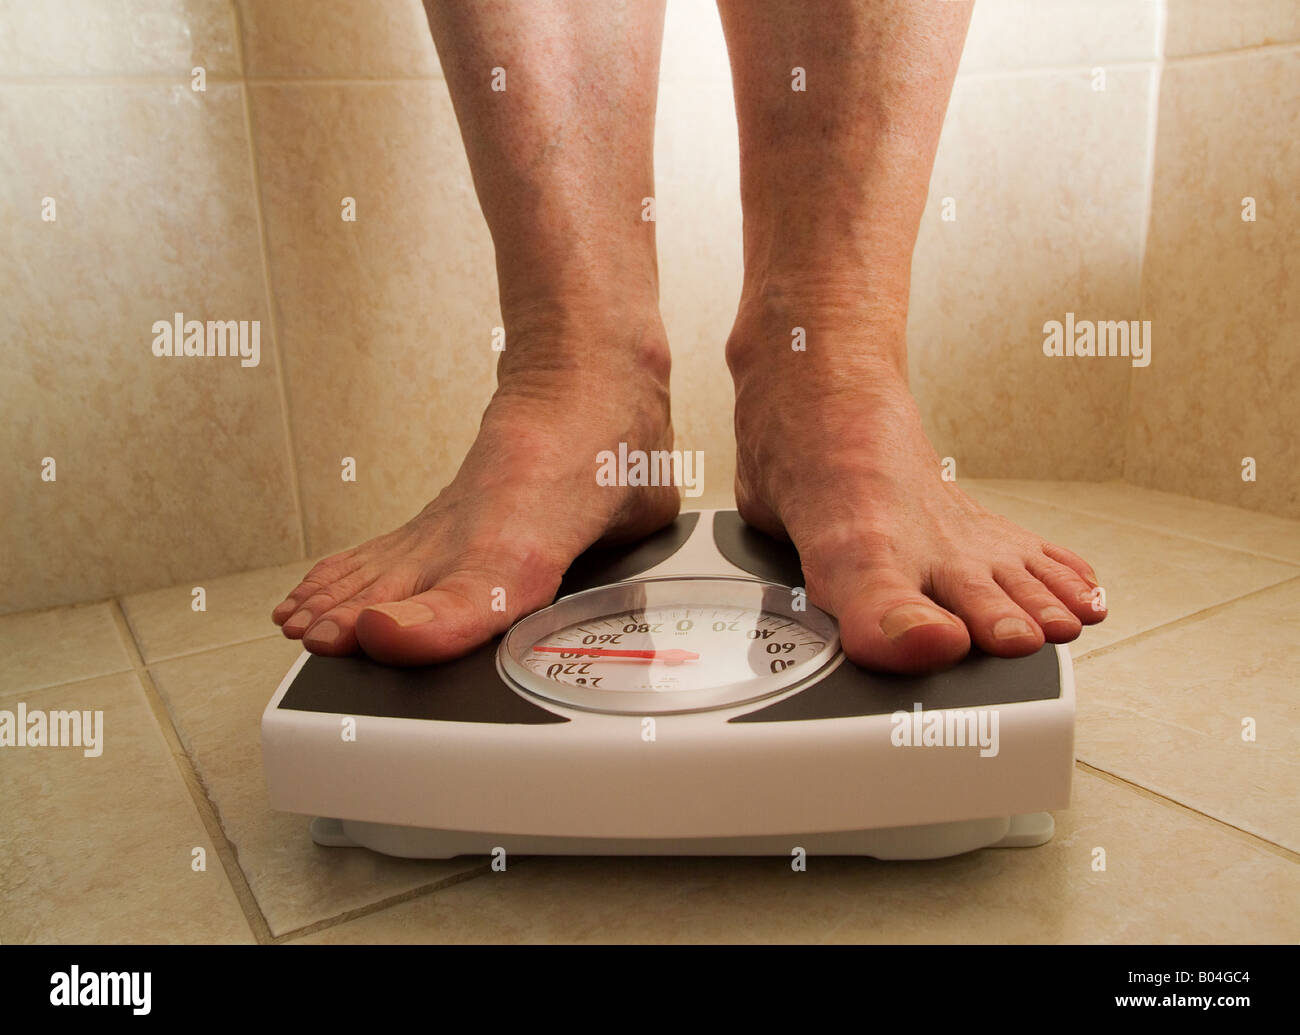 bathroom scales for weighing human weight. healthy lifestyle concept Stock  Photo - Alamy